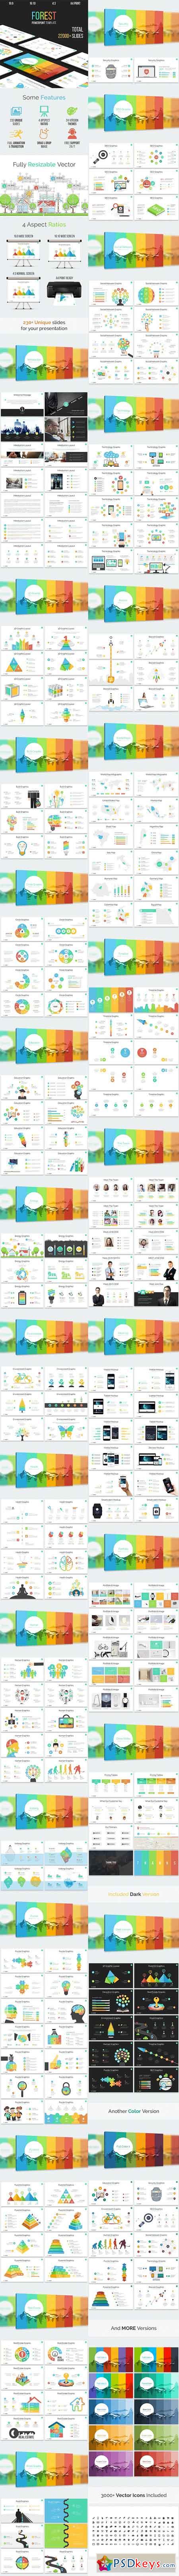 Forest - Multipurpose Powerpoint Template 17314552